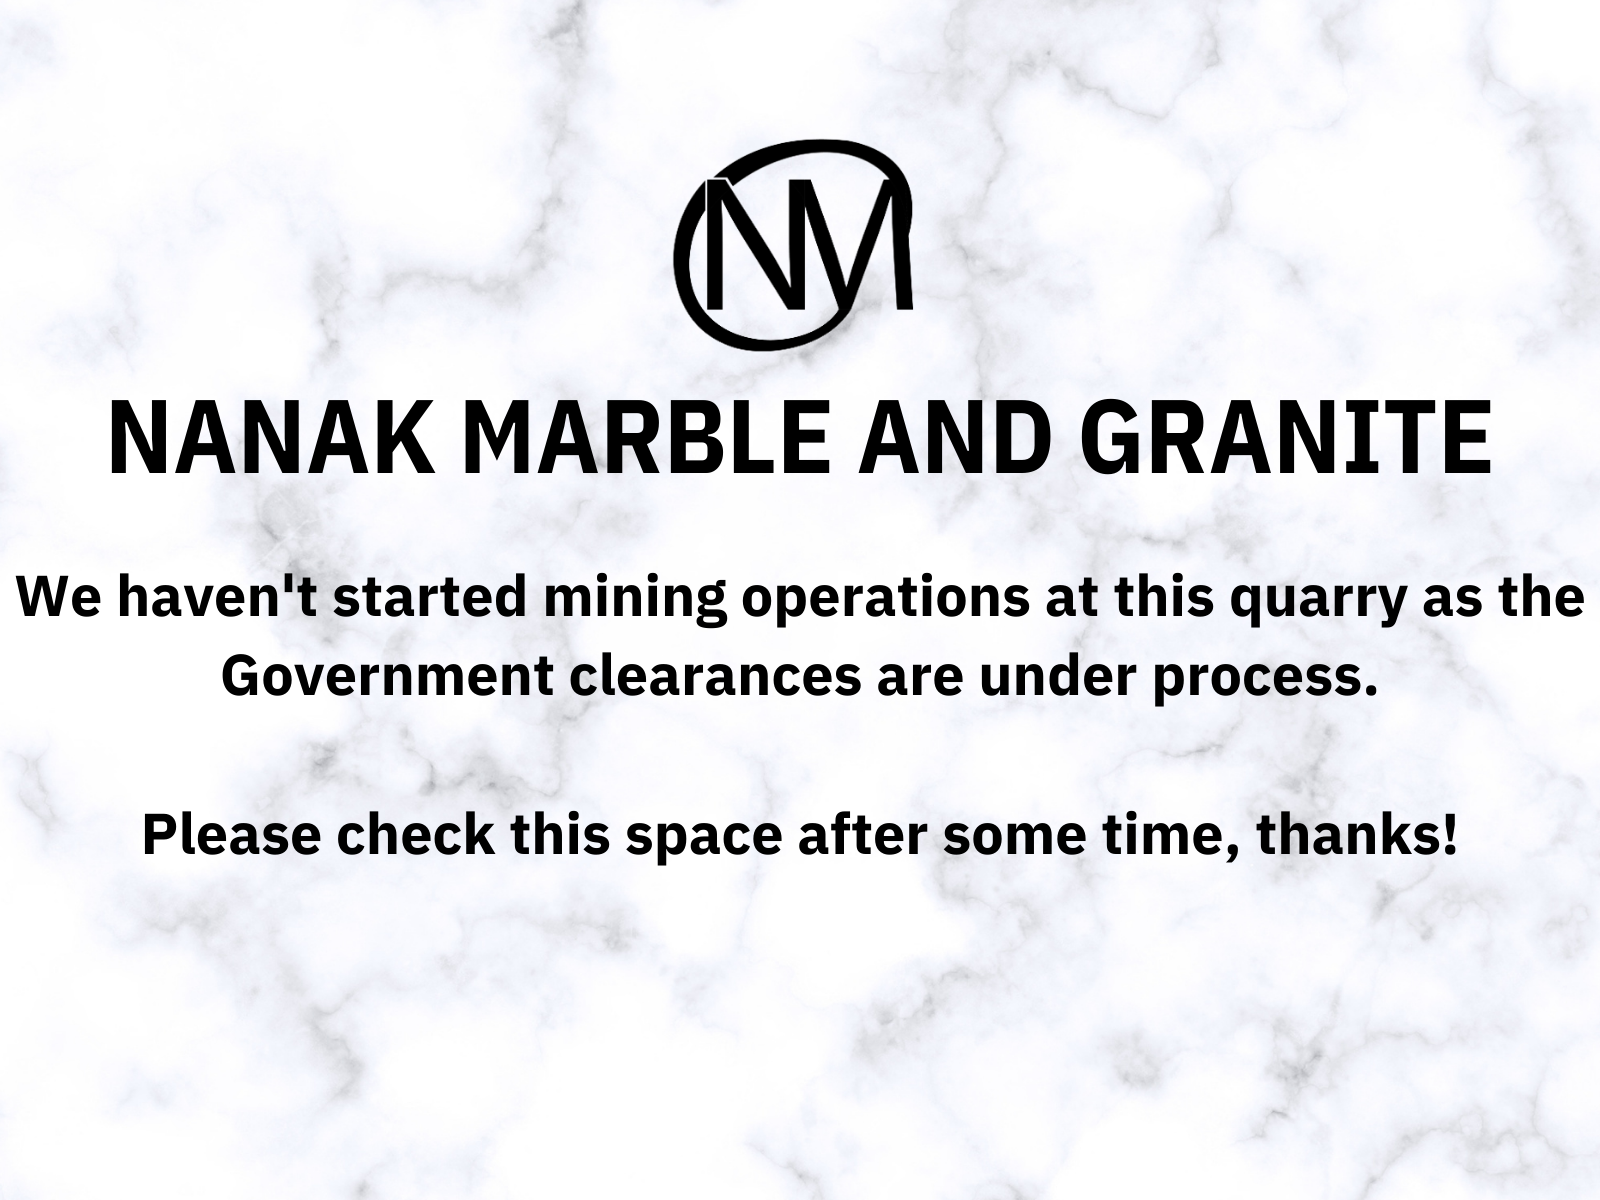 We haven’t started mining operations at this quarry since the Government clearances are under process. Please check this space after some time, thanks! (1)